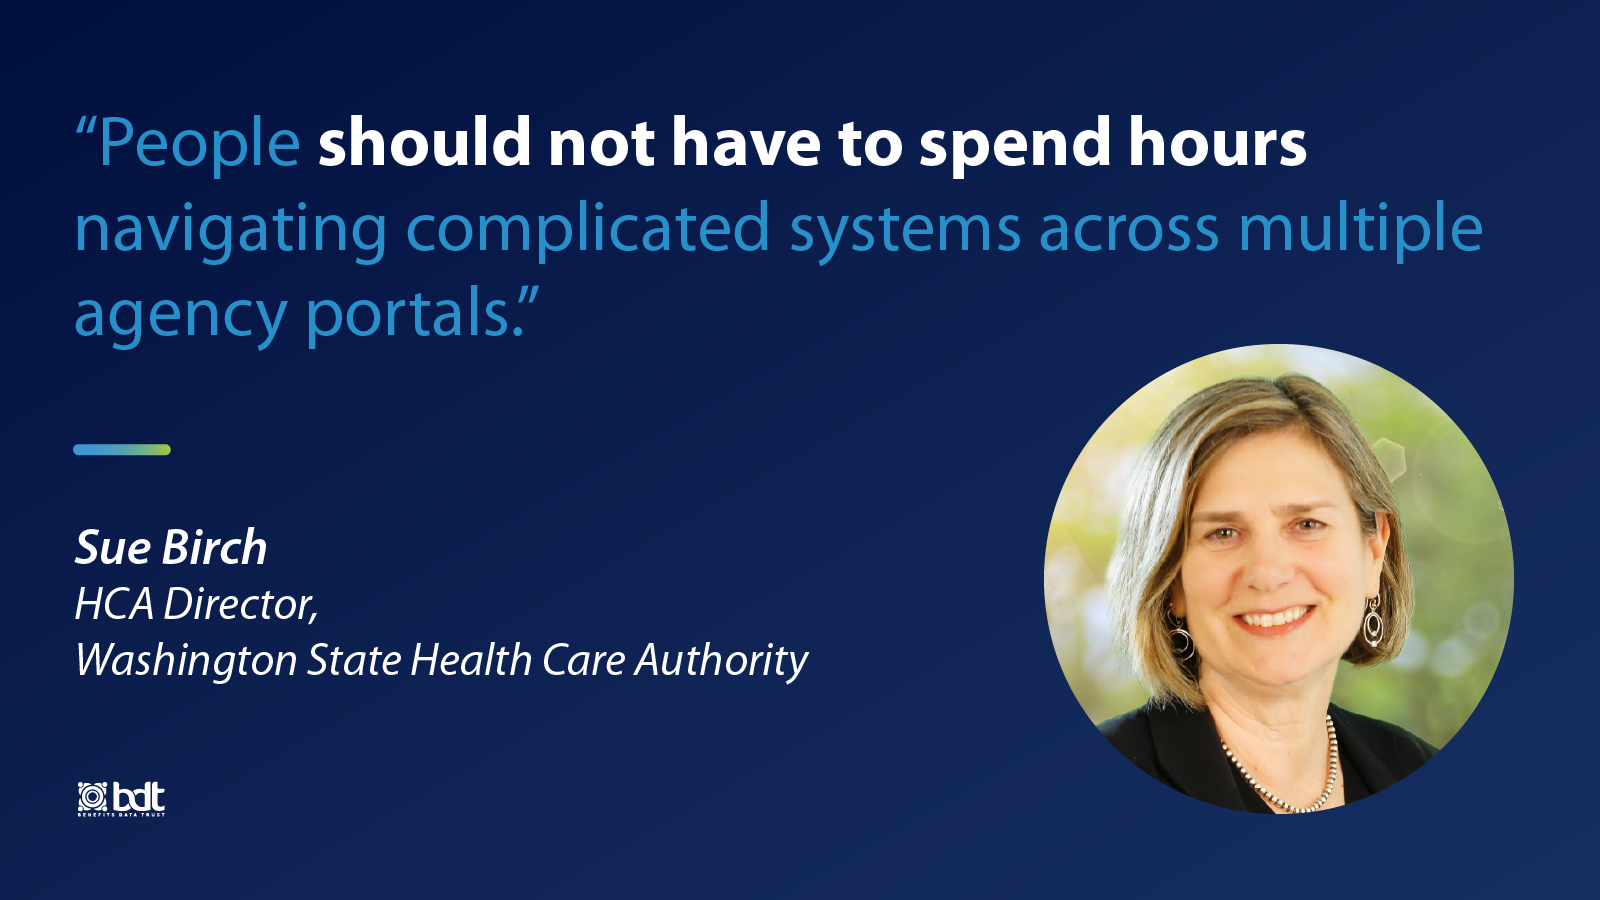 "People should not have to spend hours navigating complicated systems across multiple agency portals." – Sue Birch